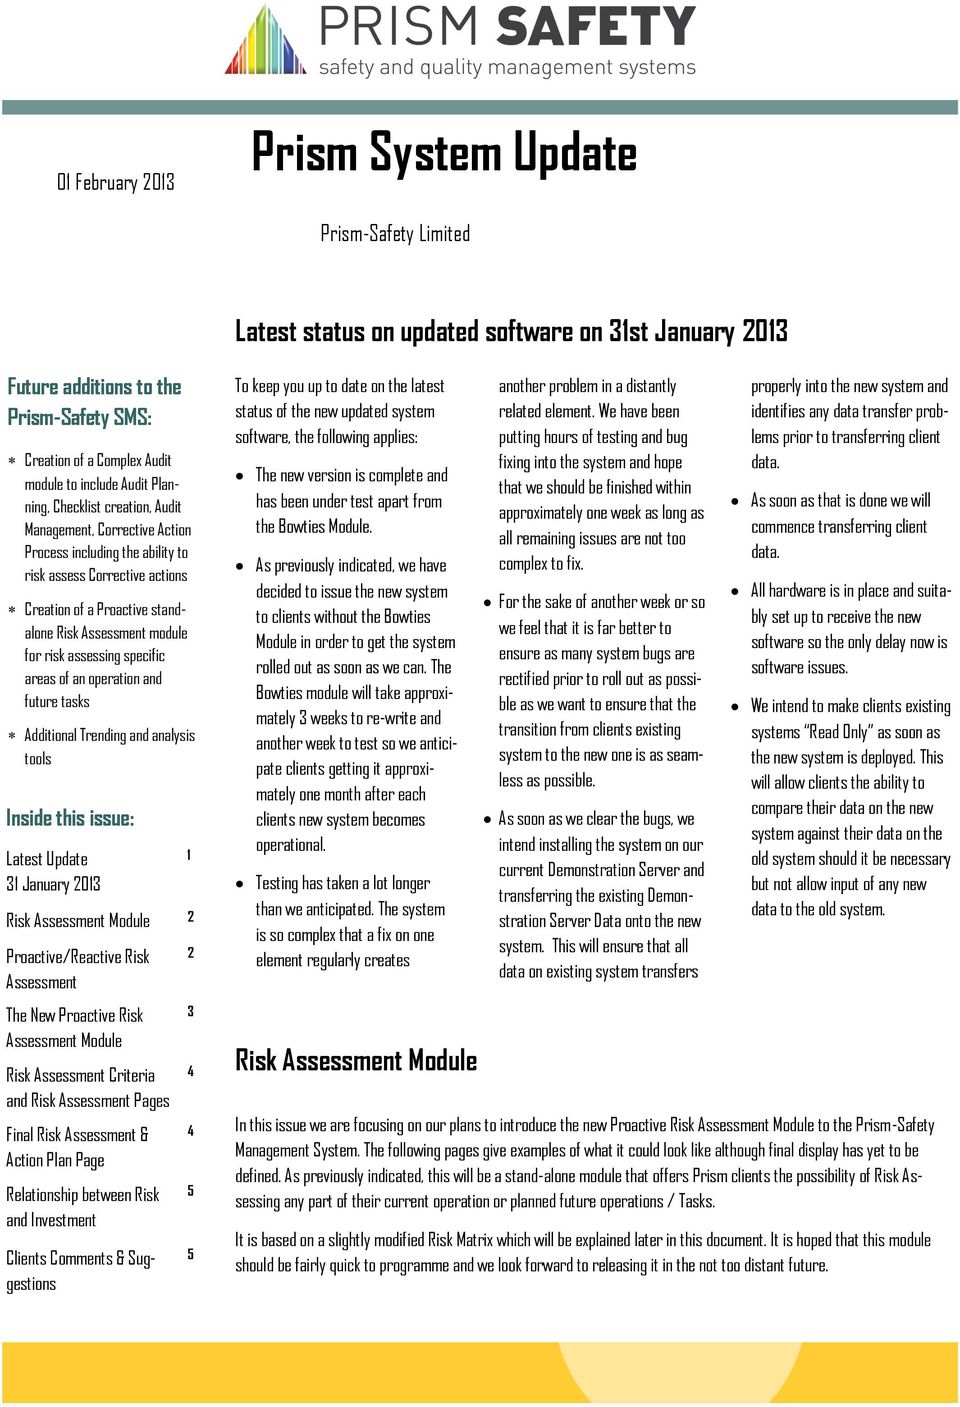 module for risk assessing specific areas of an operation and future tasks Additional Trending and analysis tools Inside this issue: Latest Update 31 January 2013 Risk Assessment Module 2